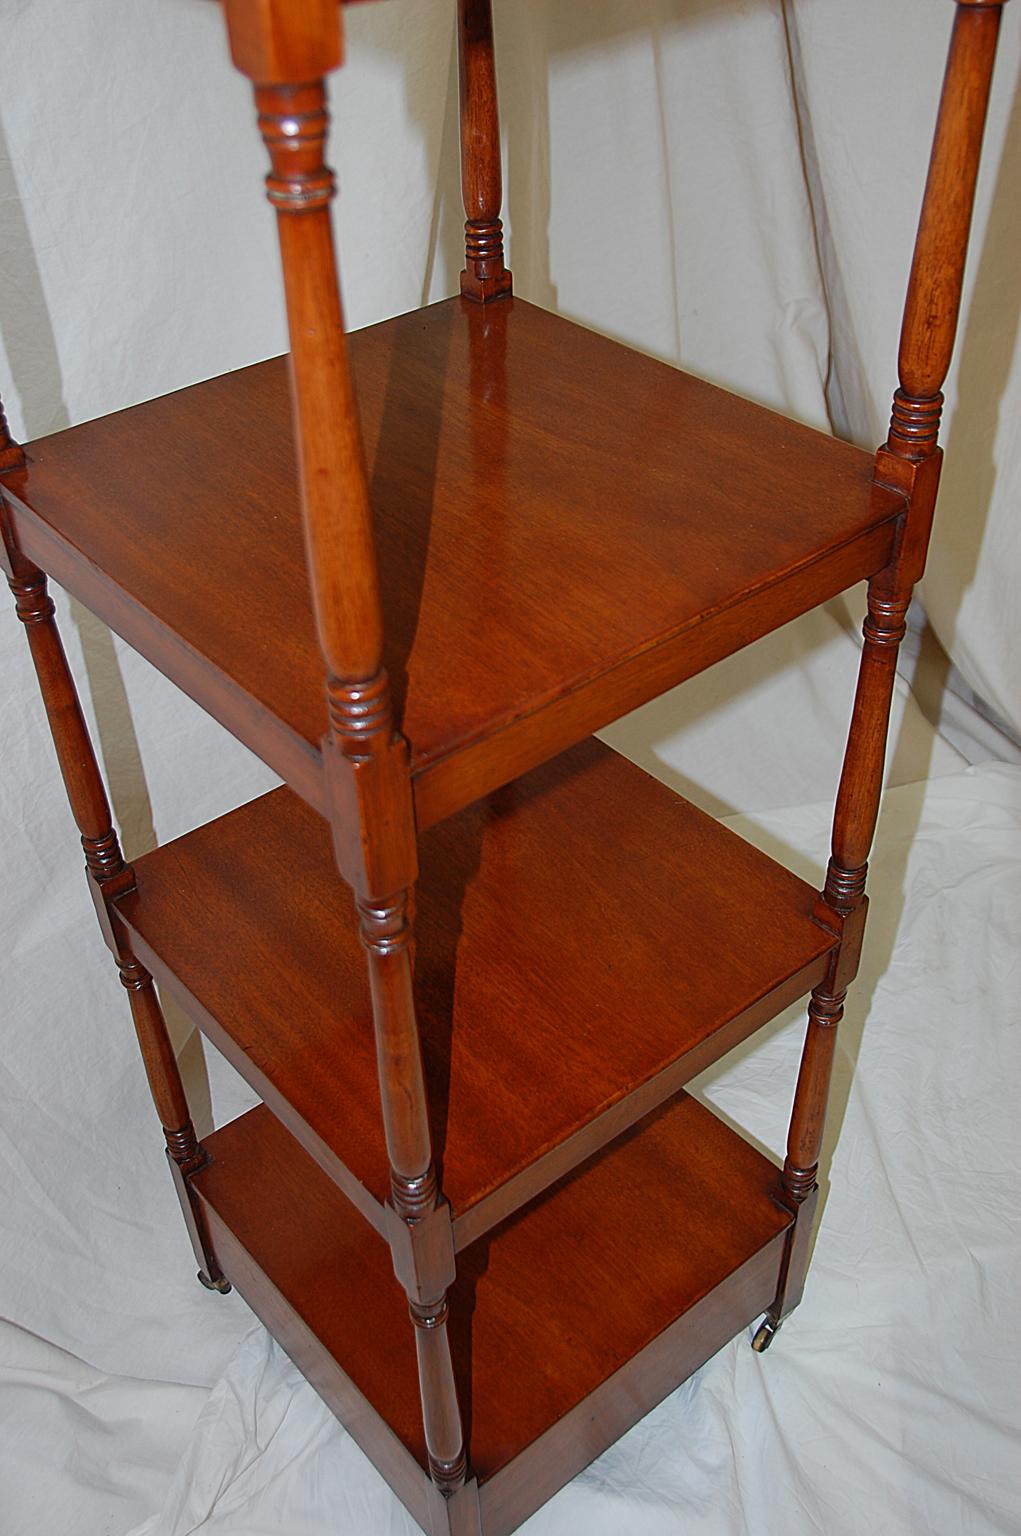 19th Century English Regency Period Mahogany Four-Tier Étagère with Drawer